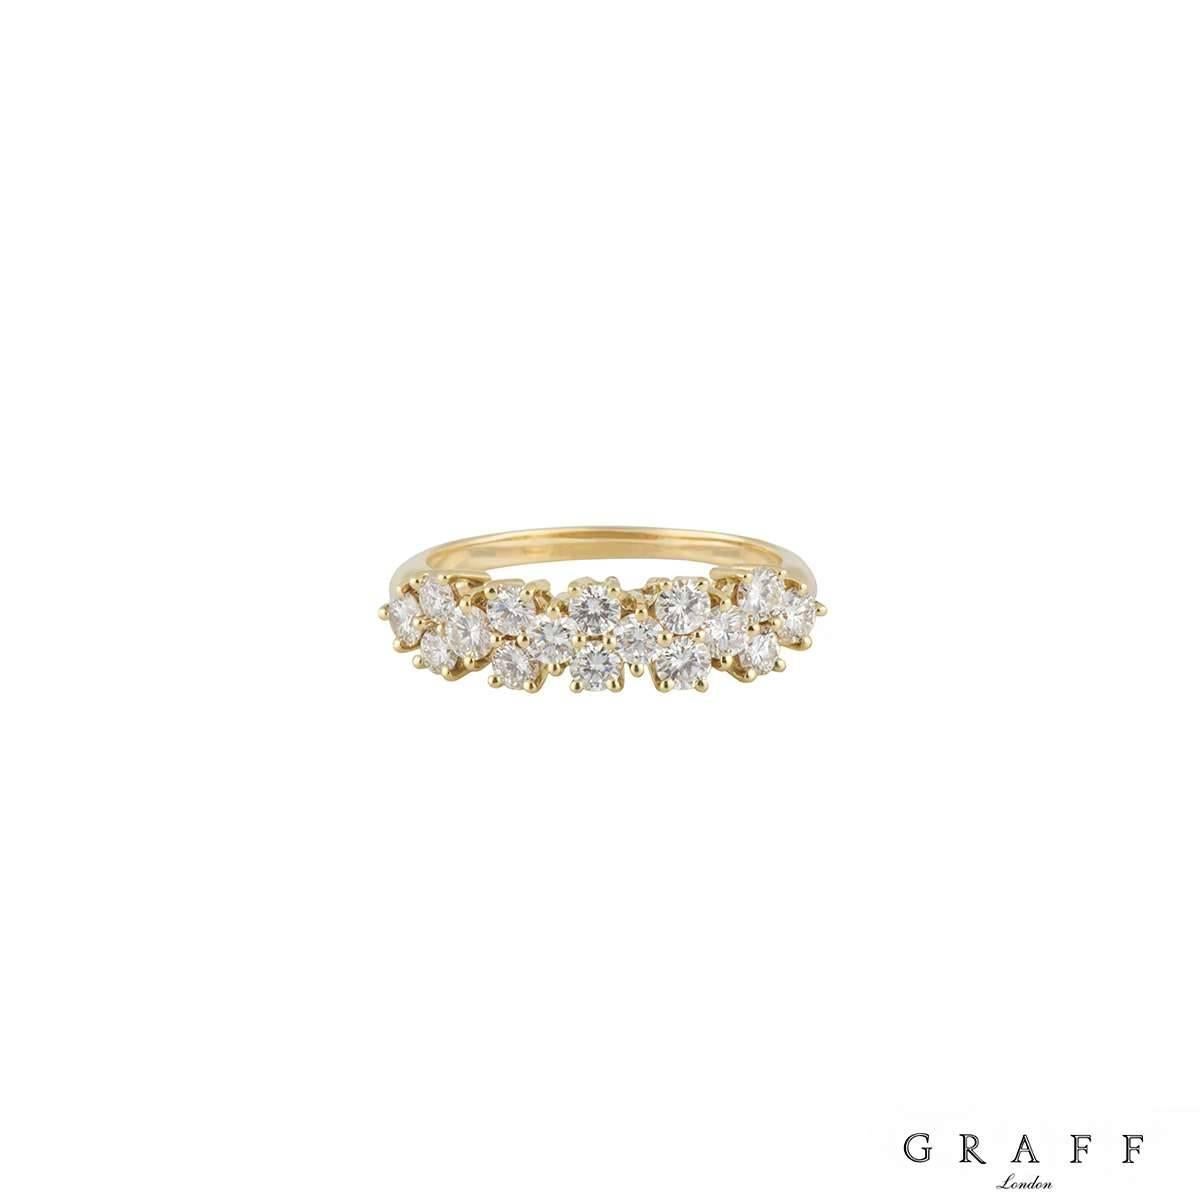 An 18k yellow gold diamond half eternity ring by Graff. The ring has 16 round brilliant cut claw set diamonds totalling approximately 1.60ct, predominantly F colour and VVS clarity. The front of the ring measures 5mm in width and tapers down to a